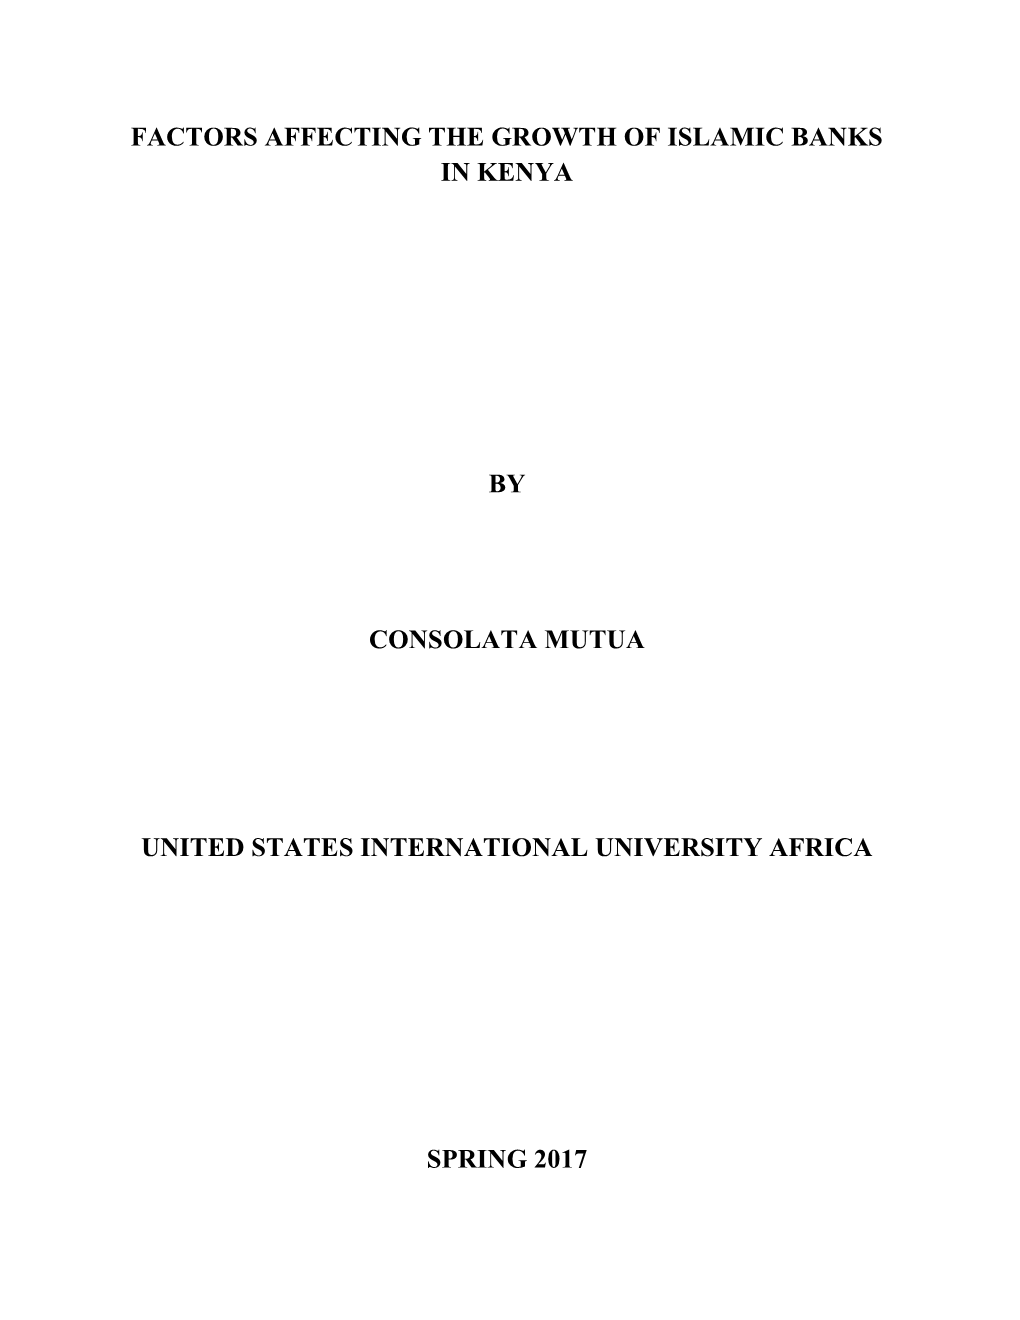 Factors Affecting the Growth of Islamic Banks in Kenya by Consolata Mutua United States International University Africa Spring 2017